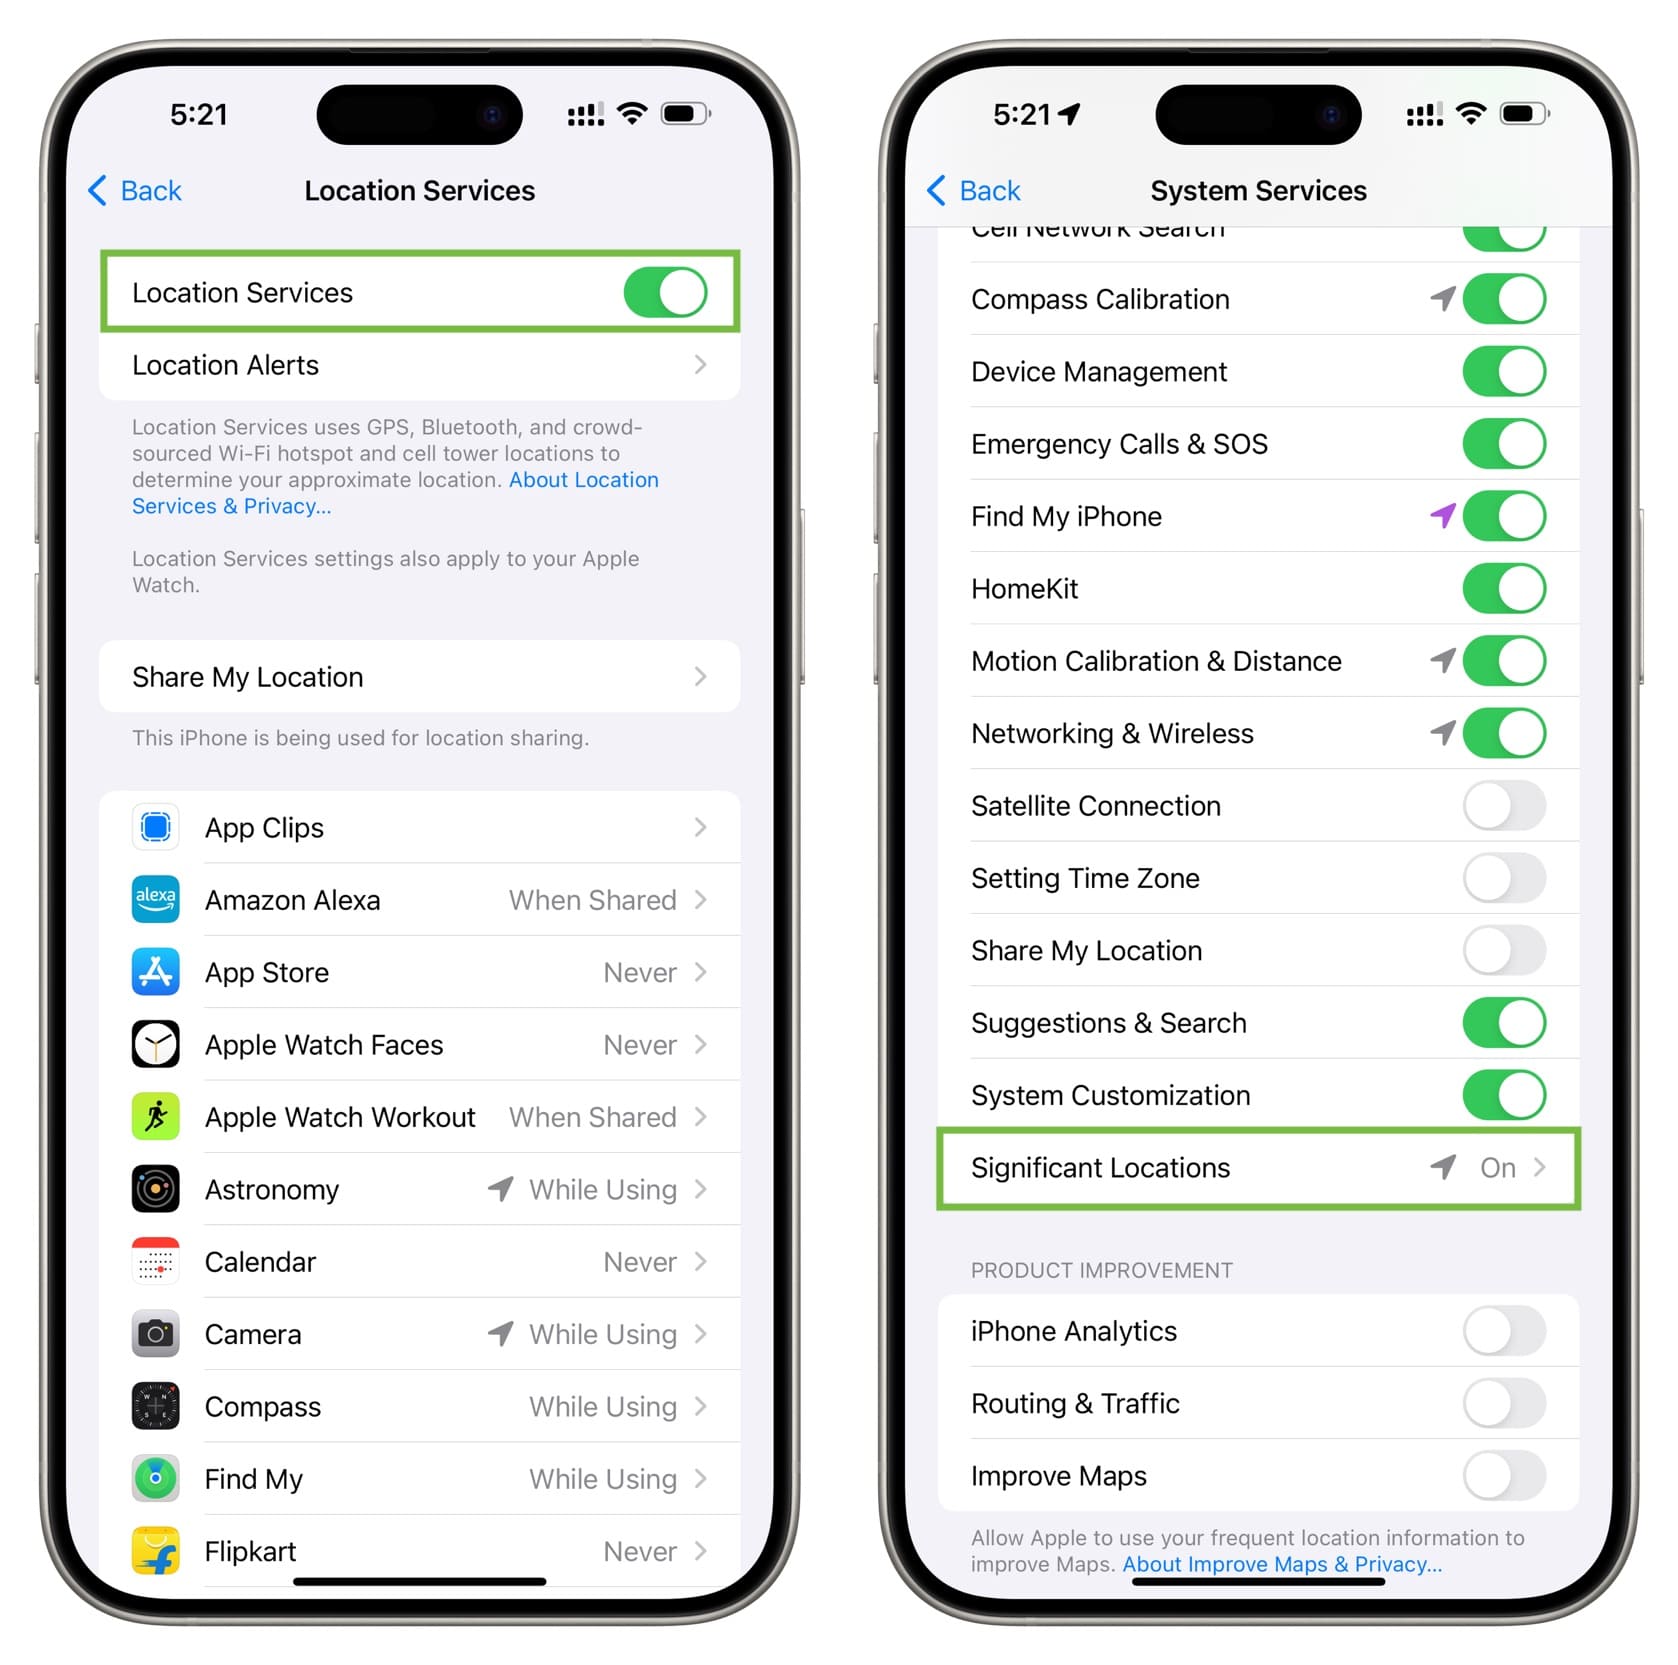 Location Services and Significant Locations in iPhone Settings